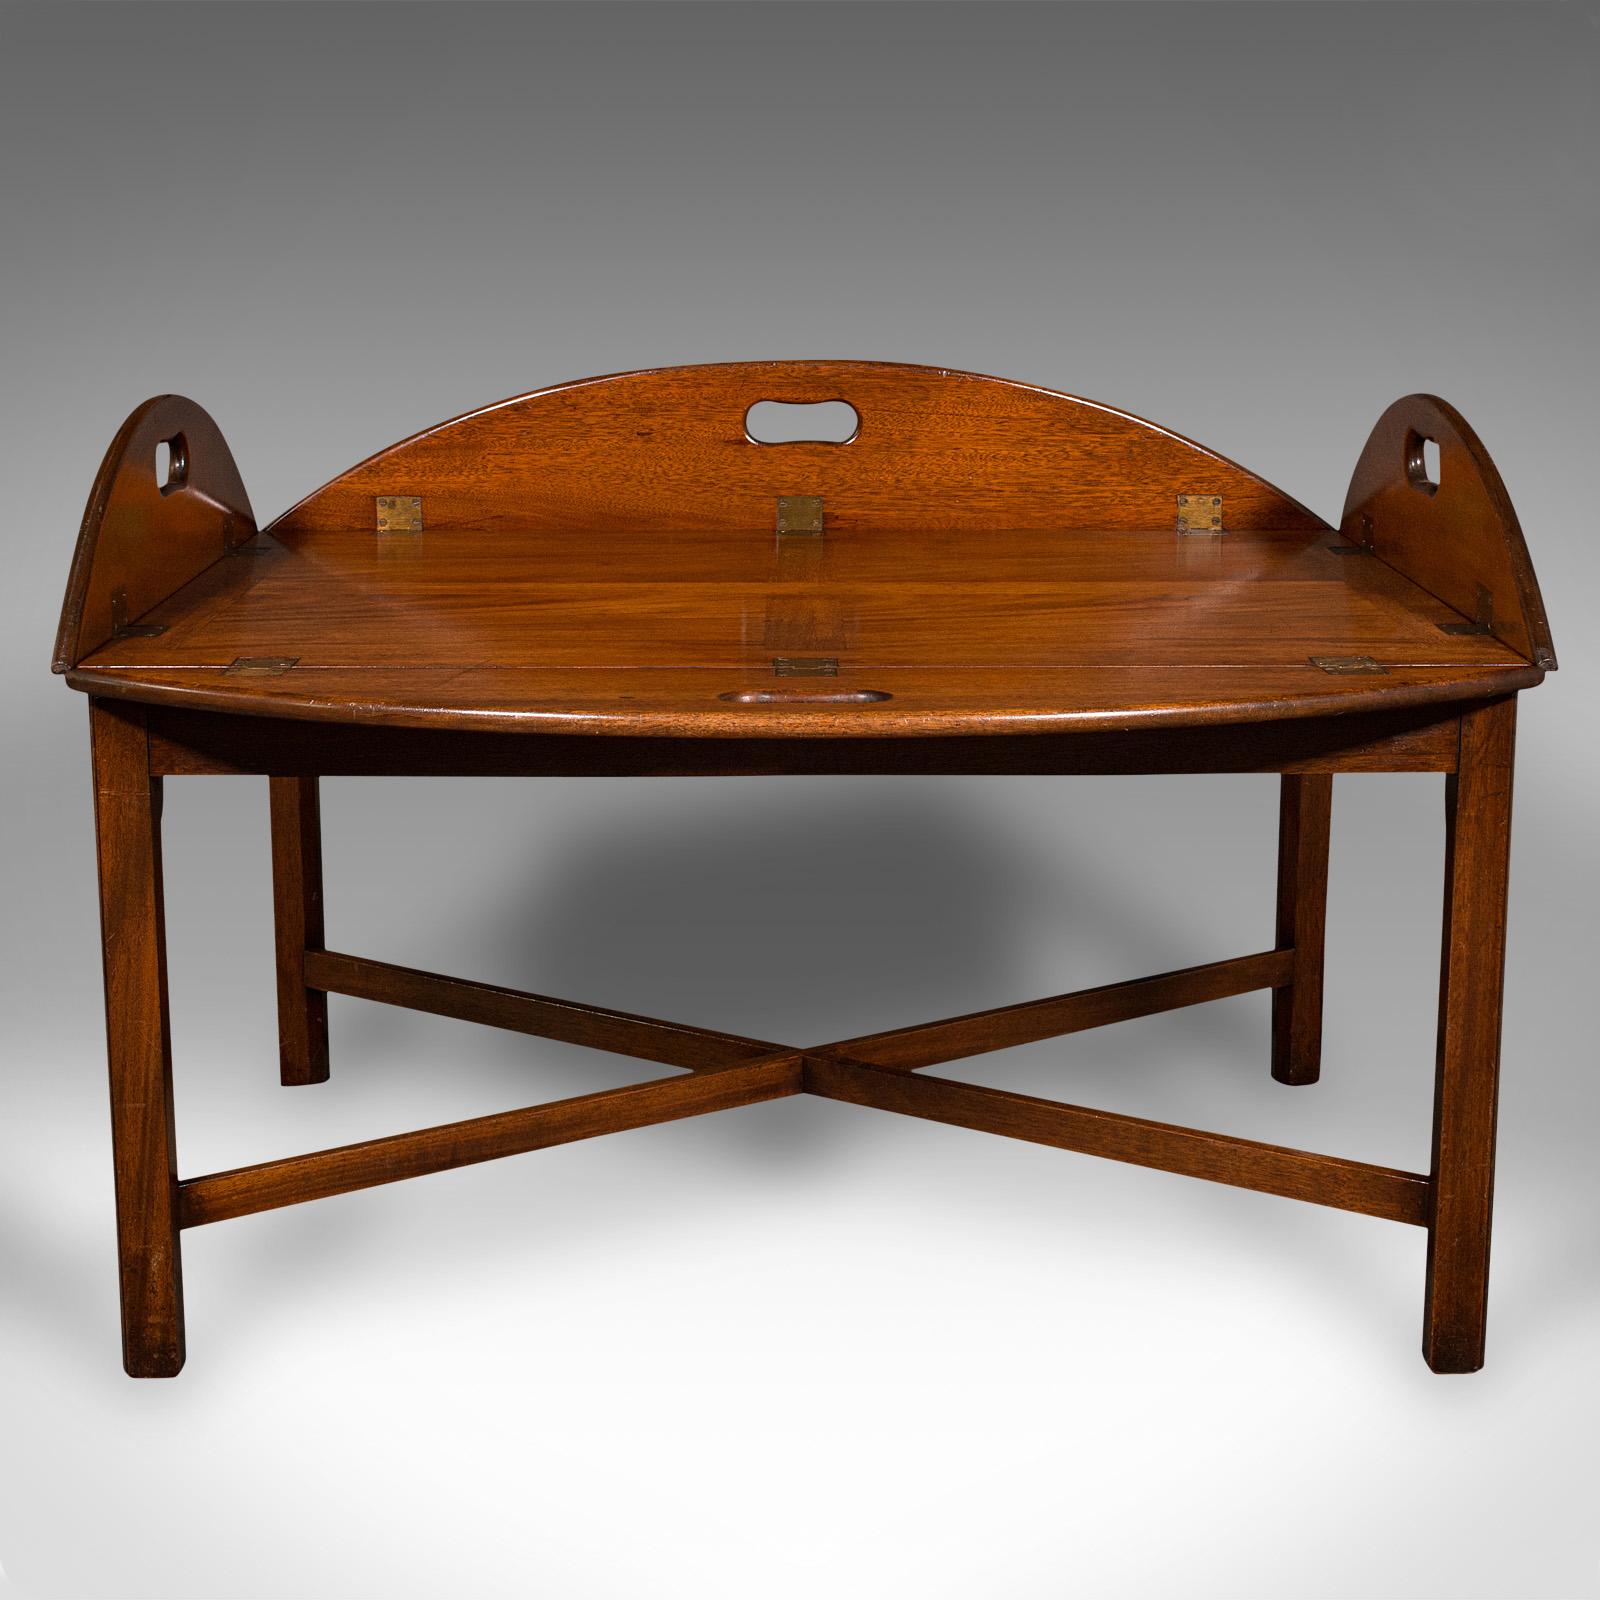 British Large Antique Ship's Serving Table, English, Butler's Stand, Edwardian, C.1910